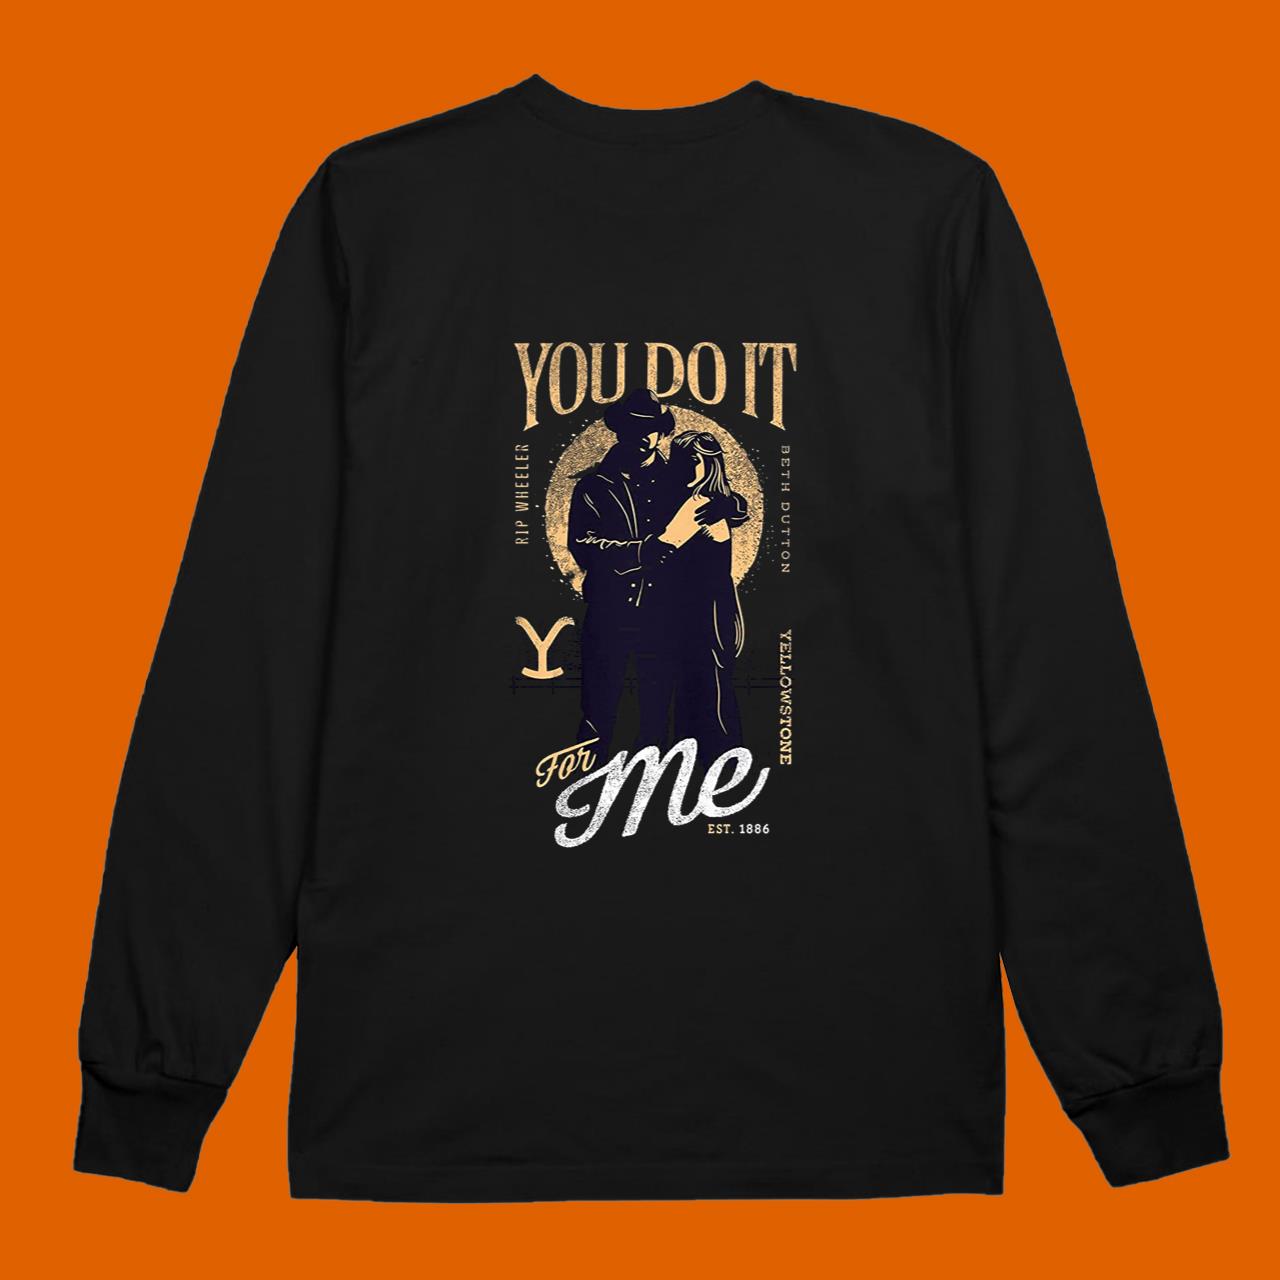 Yellowstone You Do It For Me Full Moon T-shirt